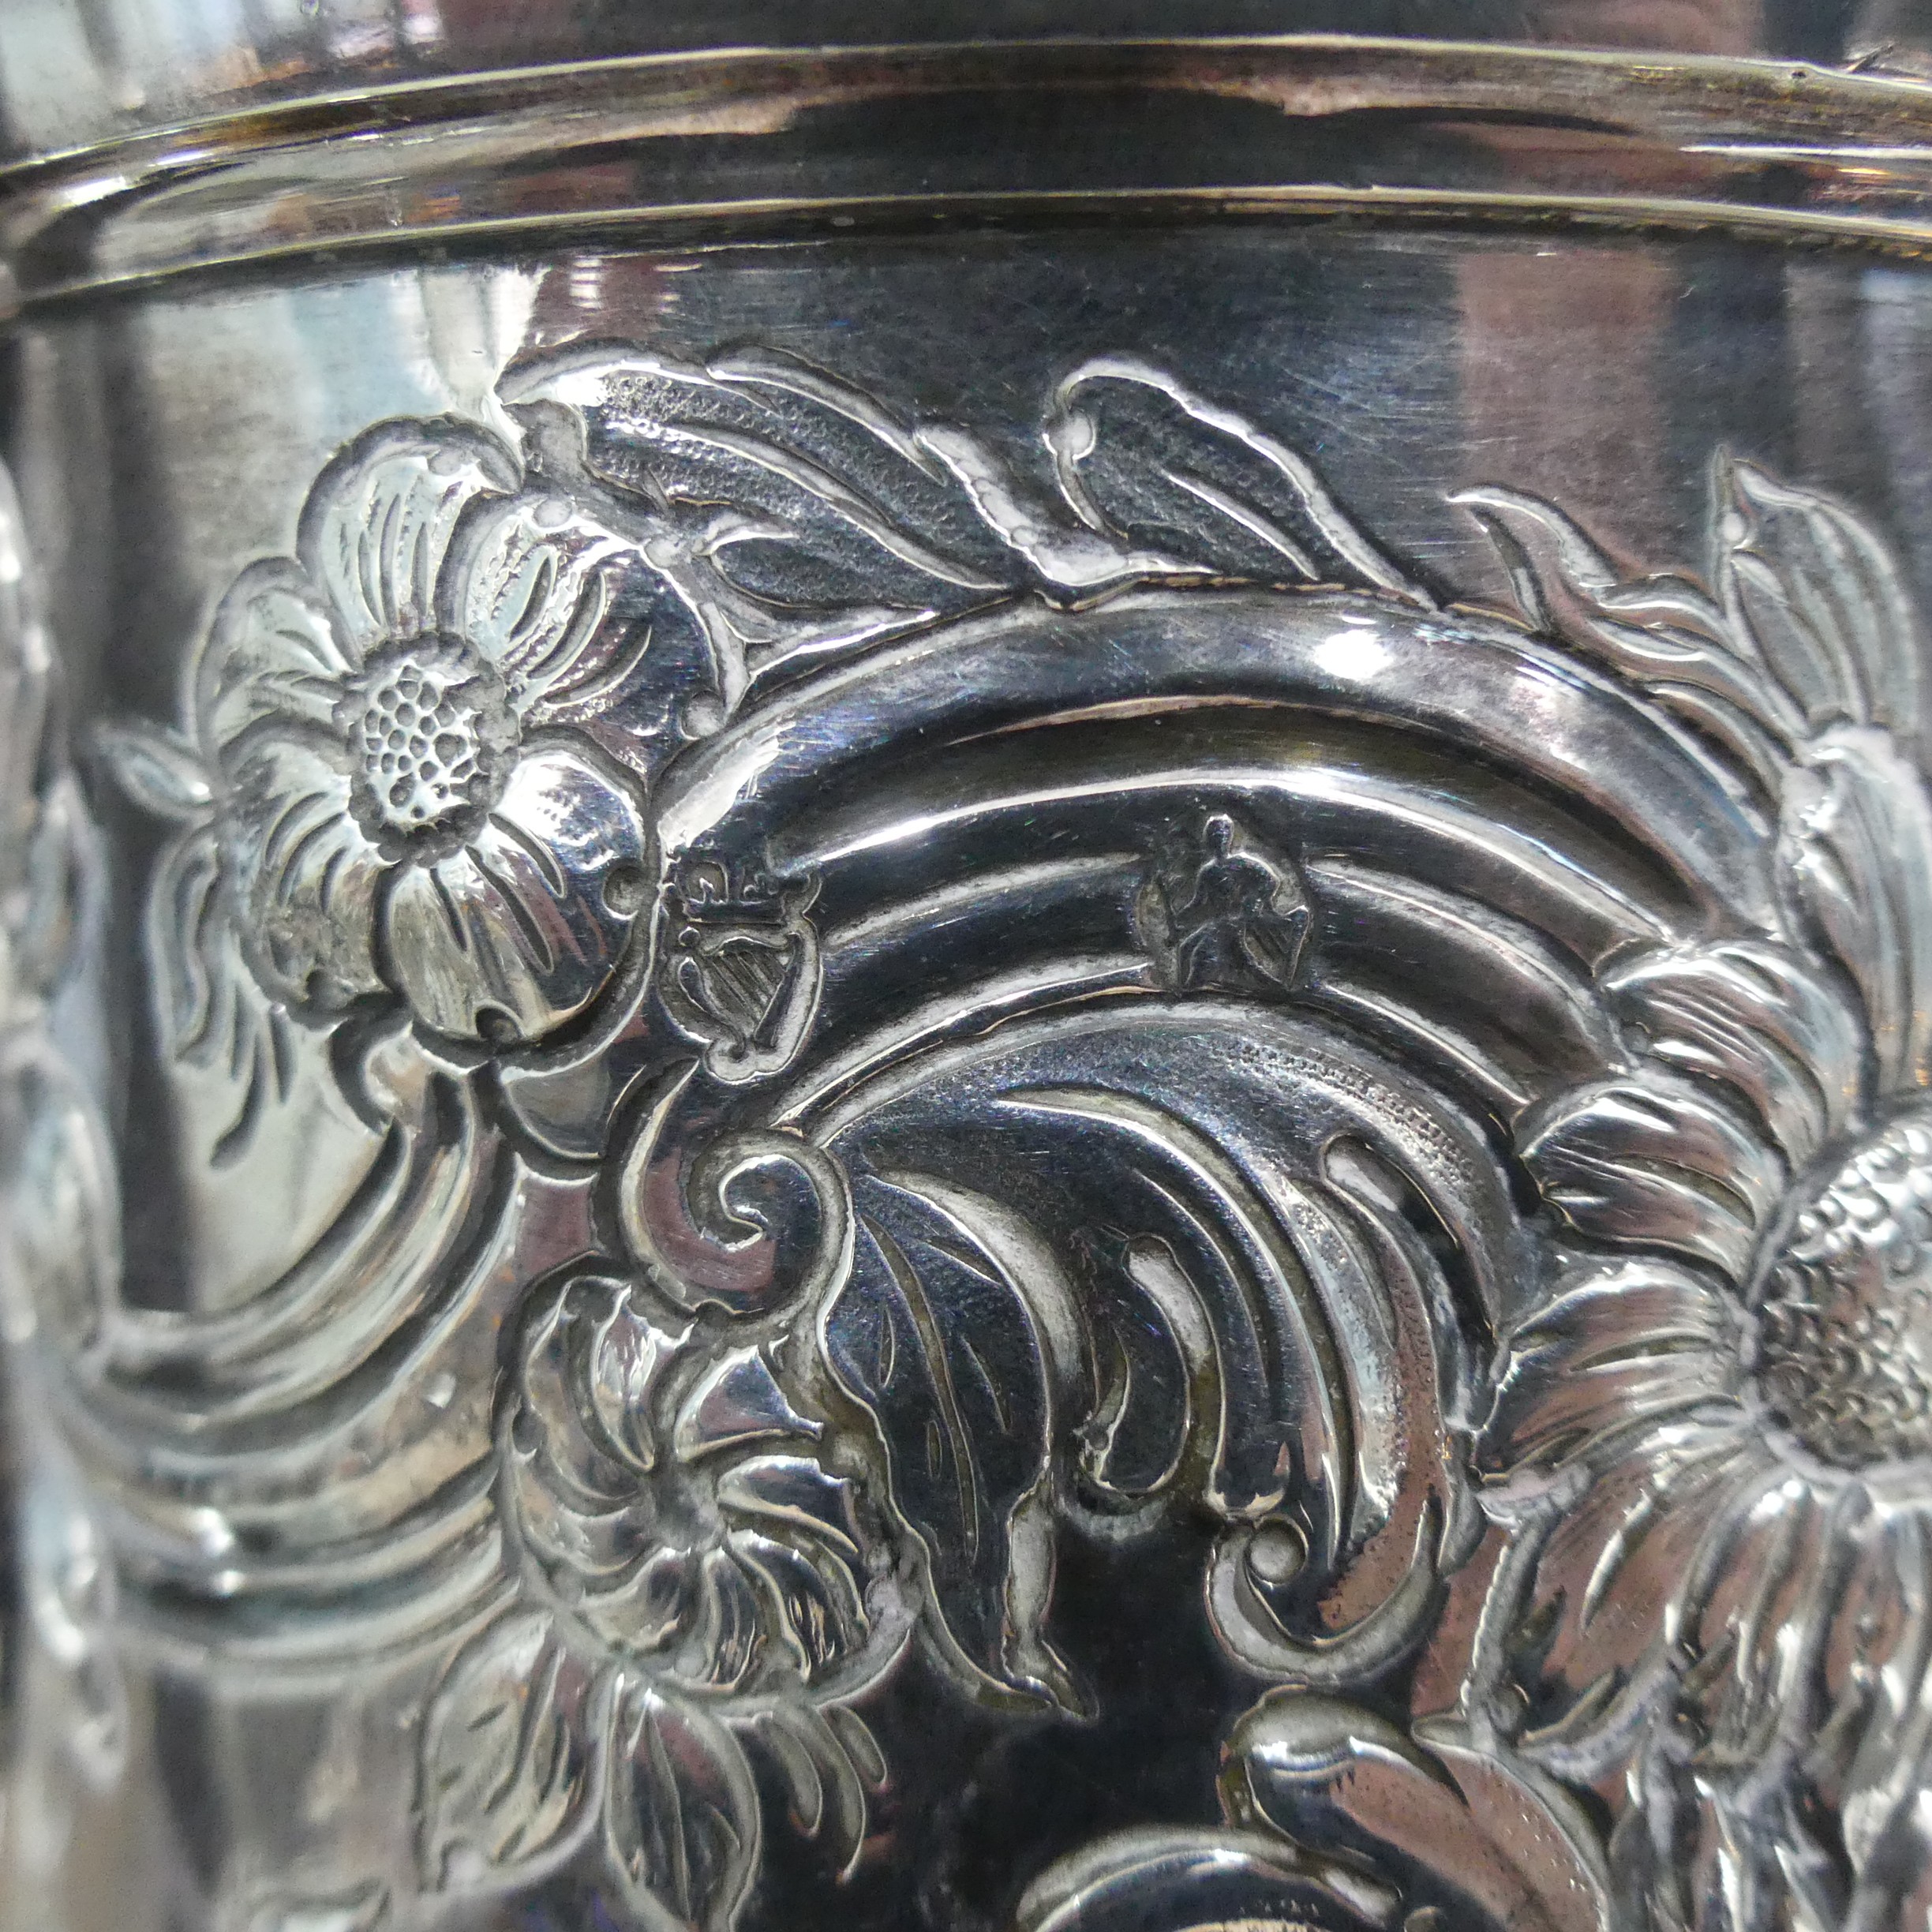 An 18thC Irish silver Coffee Pot, hallmarked for Dublin and with Hibernia mark, no makers mark or - Image 9 of 9